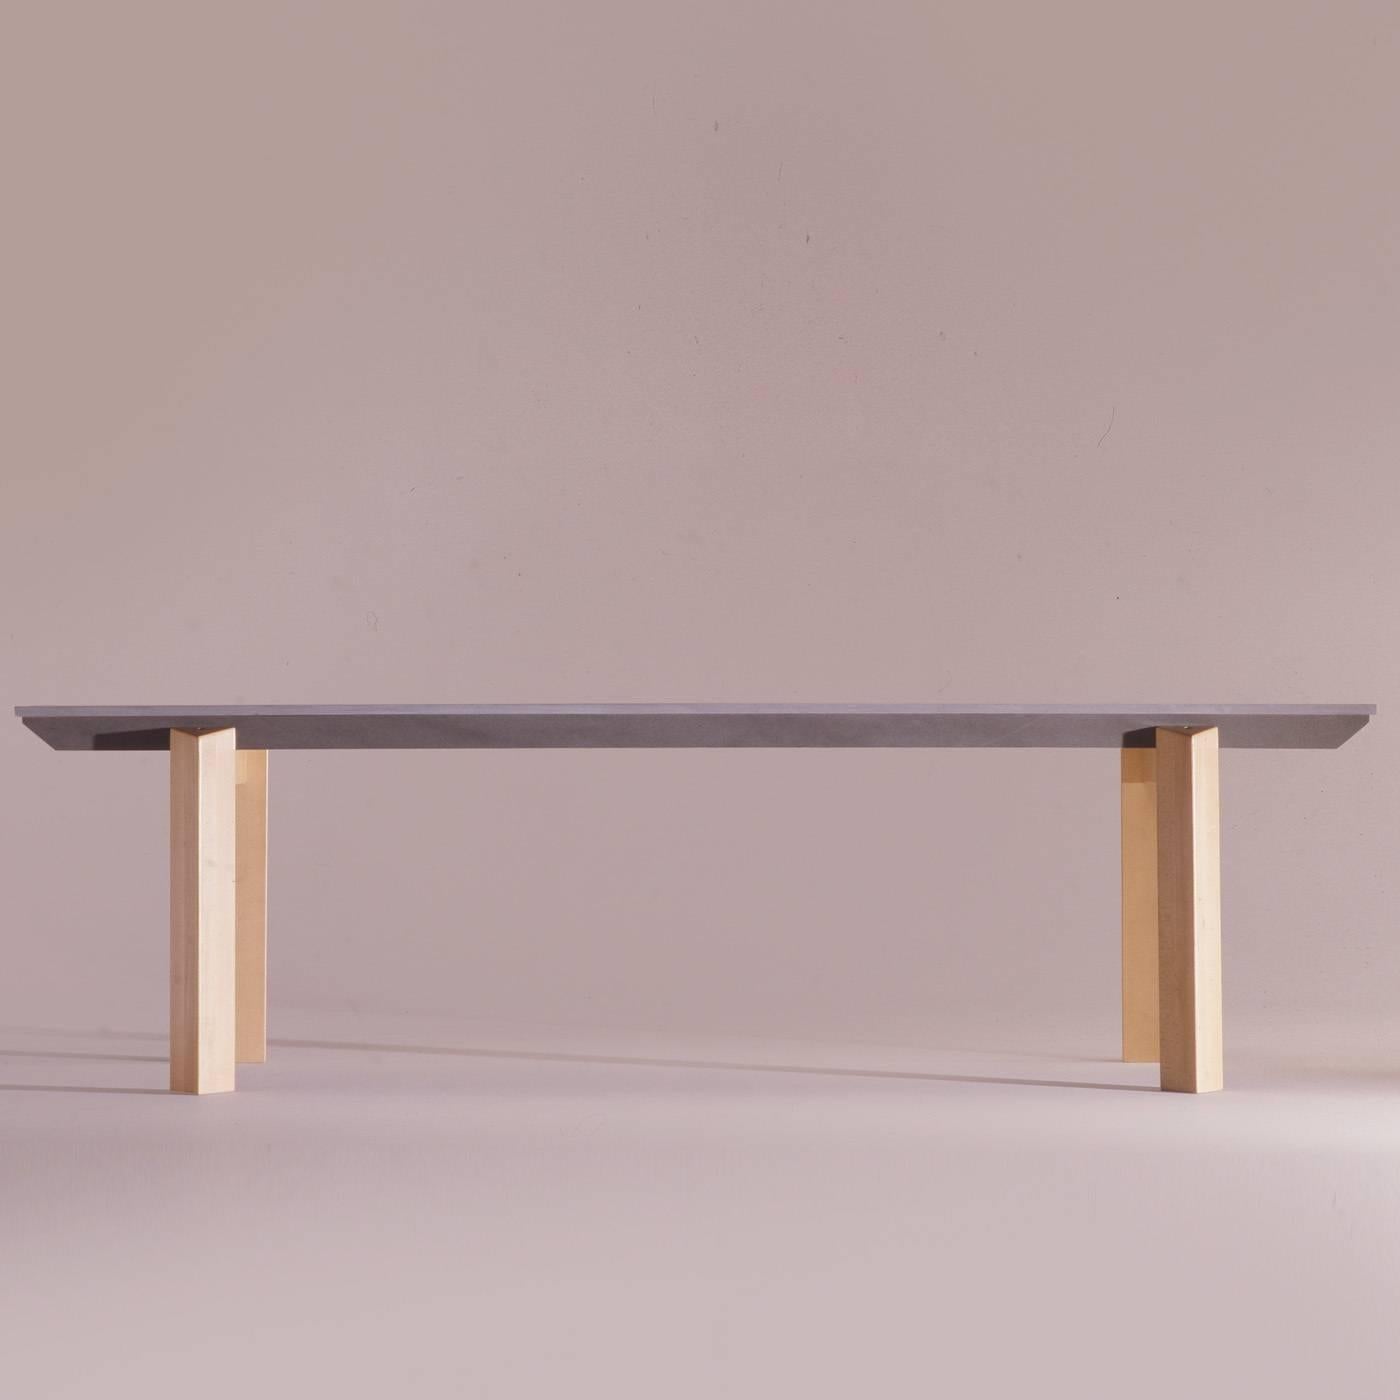 The stone T for this tabletop is highly customizable in terms of length and weight. This table can be taken apart. The two outside 'T's are structural and connected to the legs in tinted beech wood. The two inside 'T's are simply resting on the